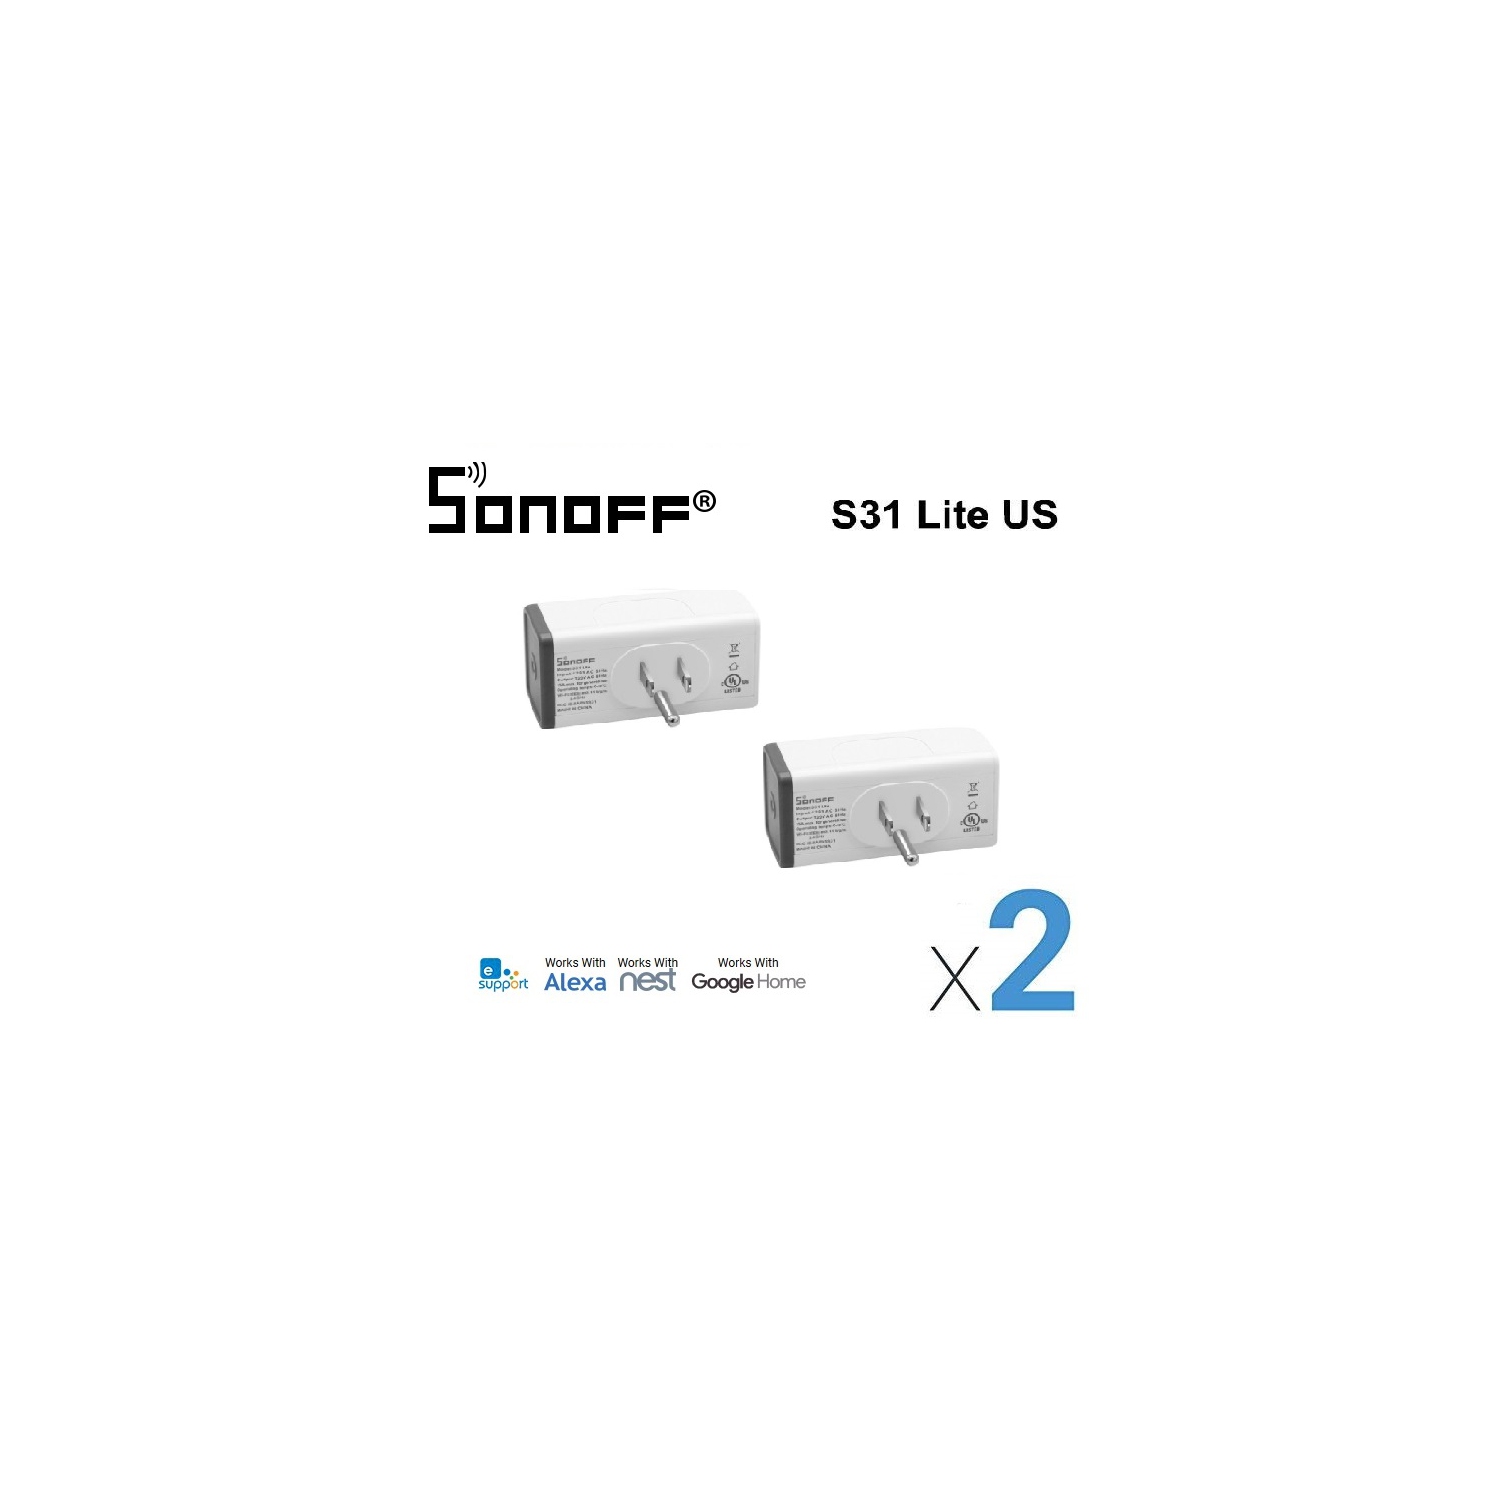 Sonoff S31 Lite - 2 sets -Smart WiFi Socket Remote Control Switch Outlet Smart Switch Works With Alexa Google Home Assistant